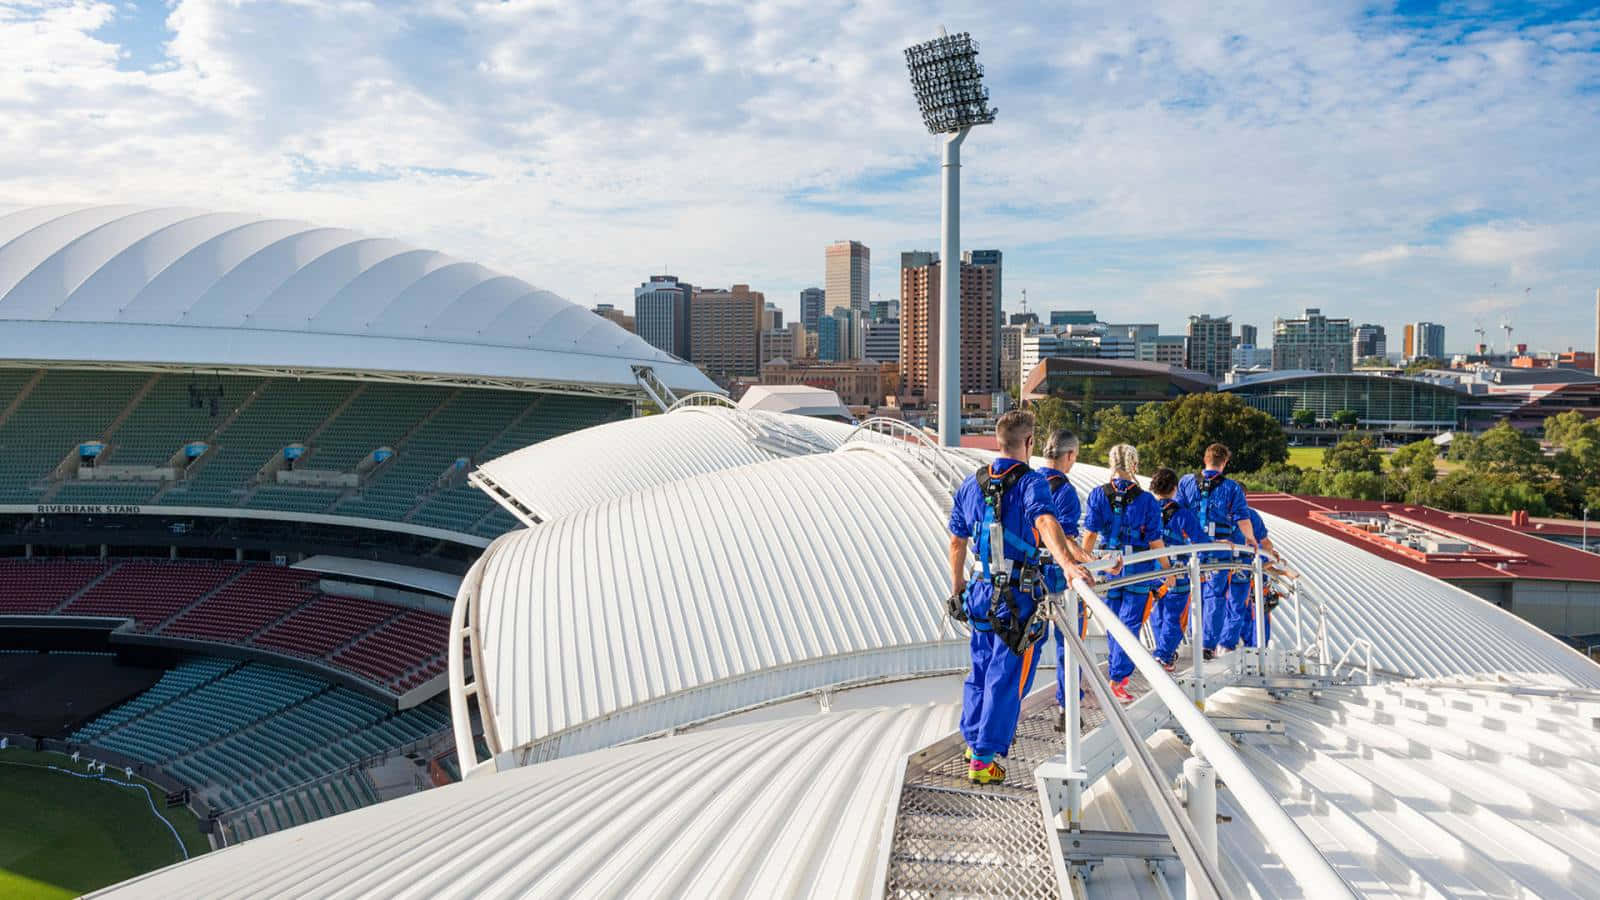 Adelaide Oval Roof Climb Experience Wallpaper